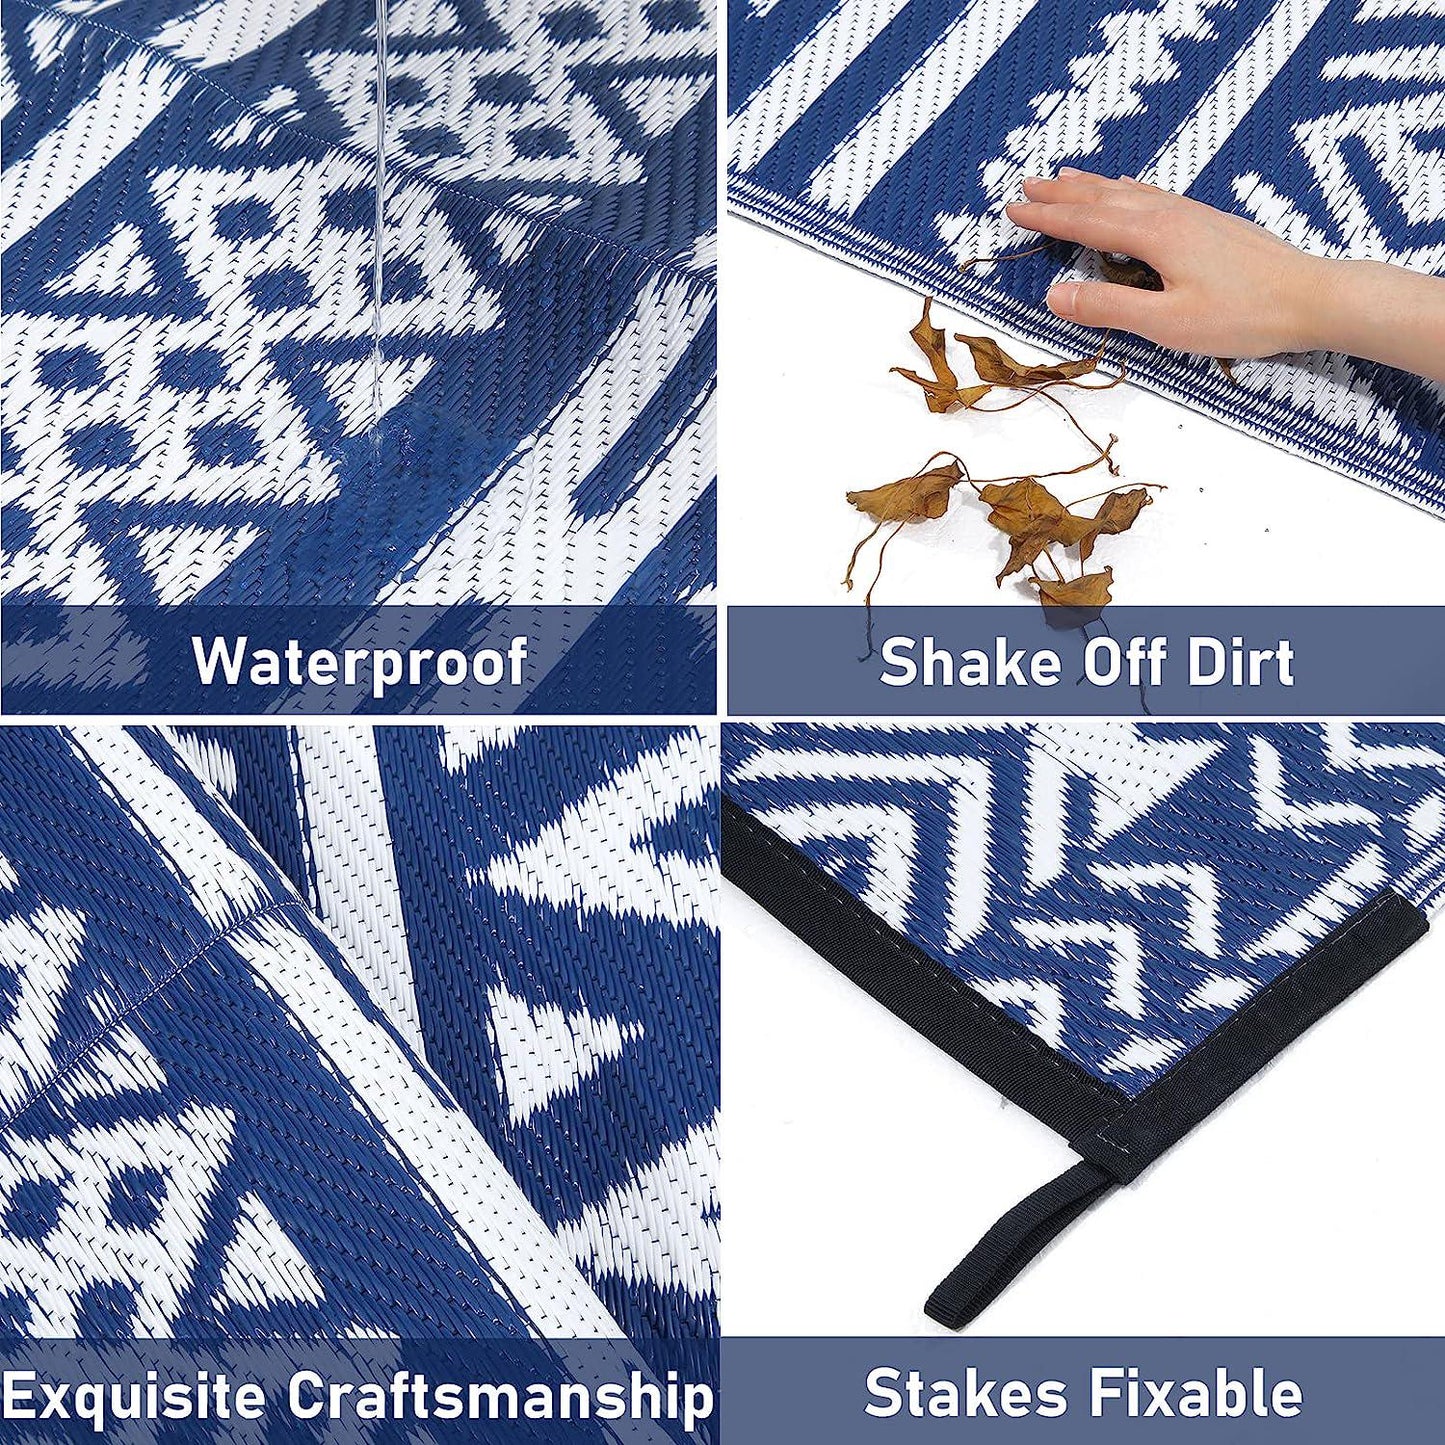 Reversible Outdoor Rug, Plastic Straw Patio Rugs RV Camping Rug Reversible Mats, Large Floor Mat and Rug Camping(Navy/White)